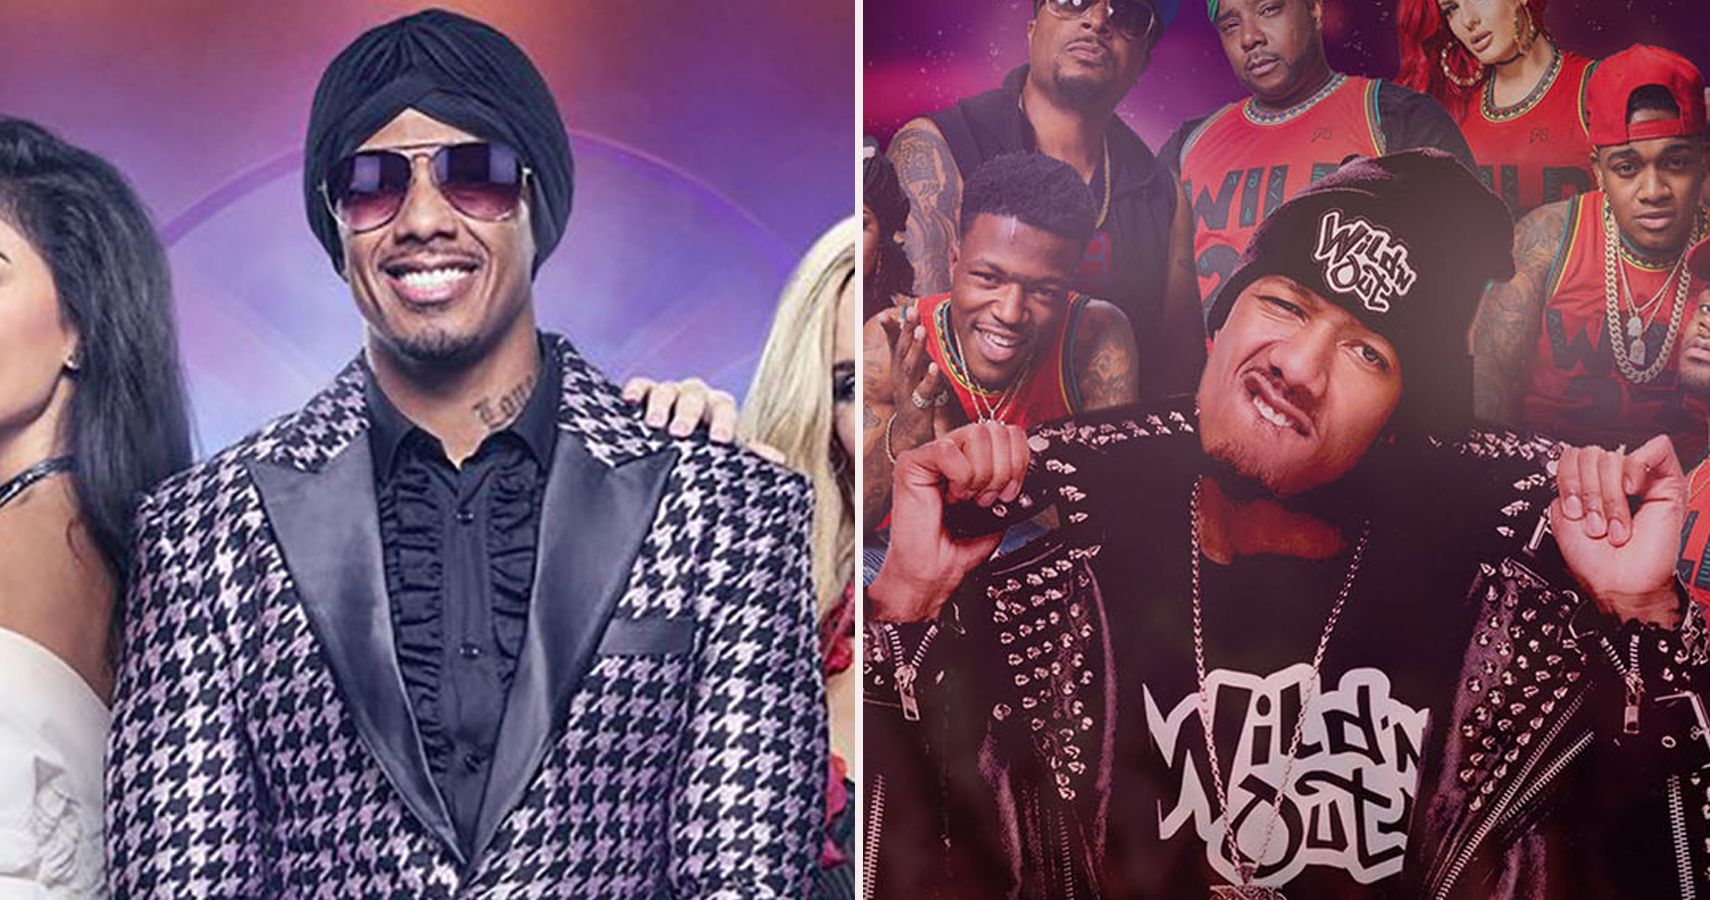 Nick Cannon 10 Shows He Has Hosted, Ranked